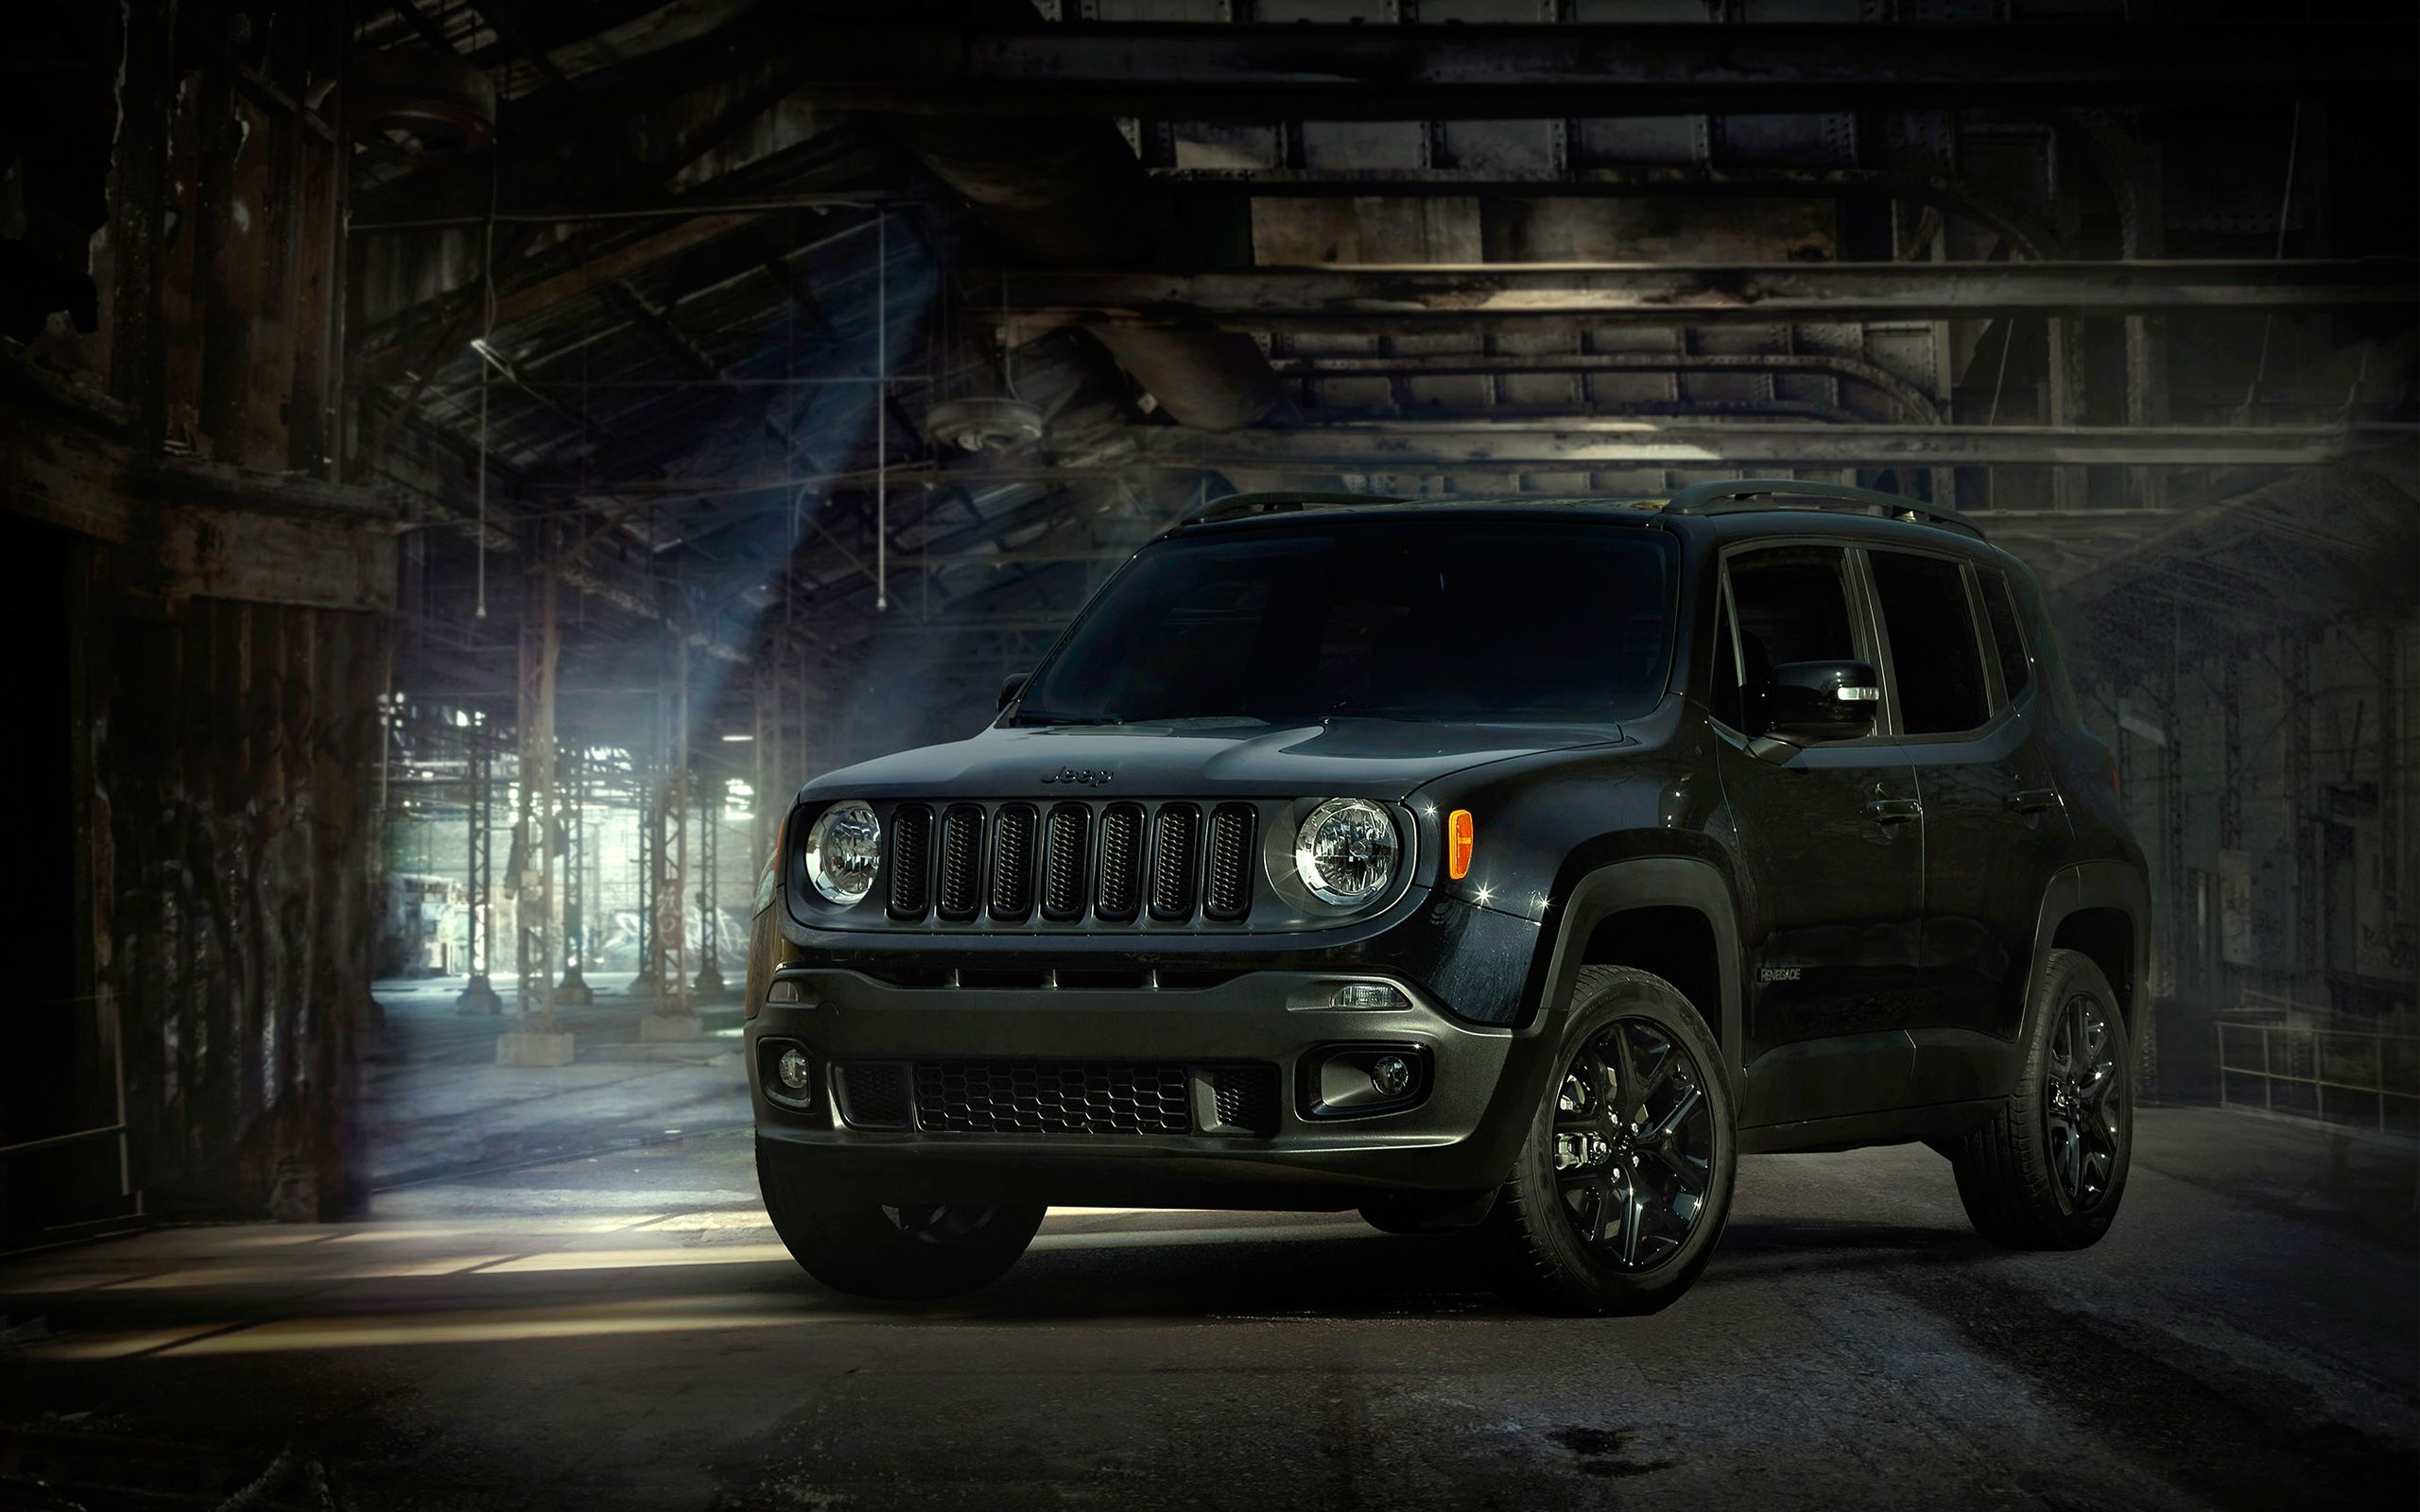 Jeep Renegade, Auto industry, Top free backgrounds, Wallpaper collection, 2560x1600 HD Desktop